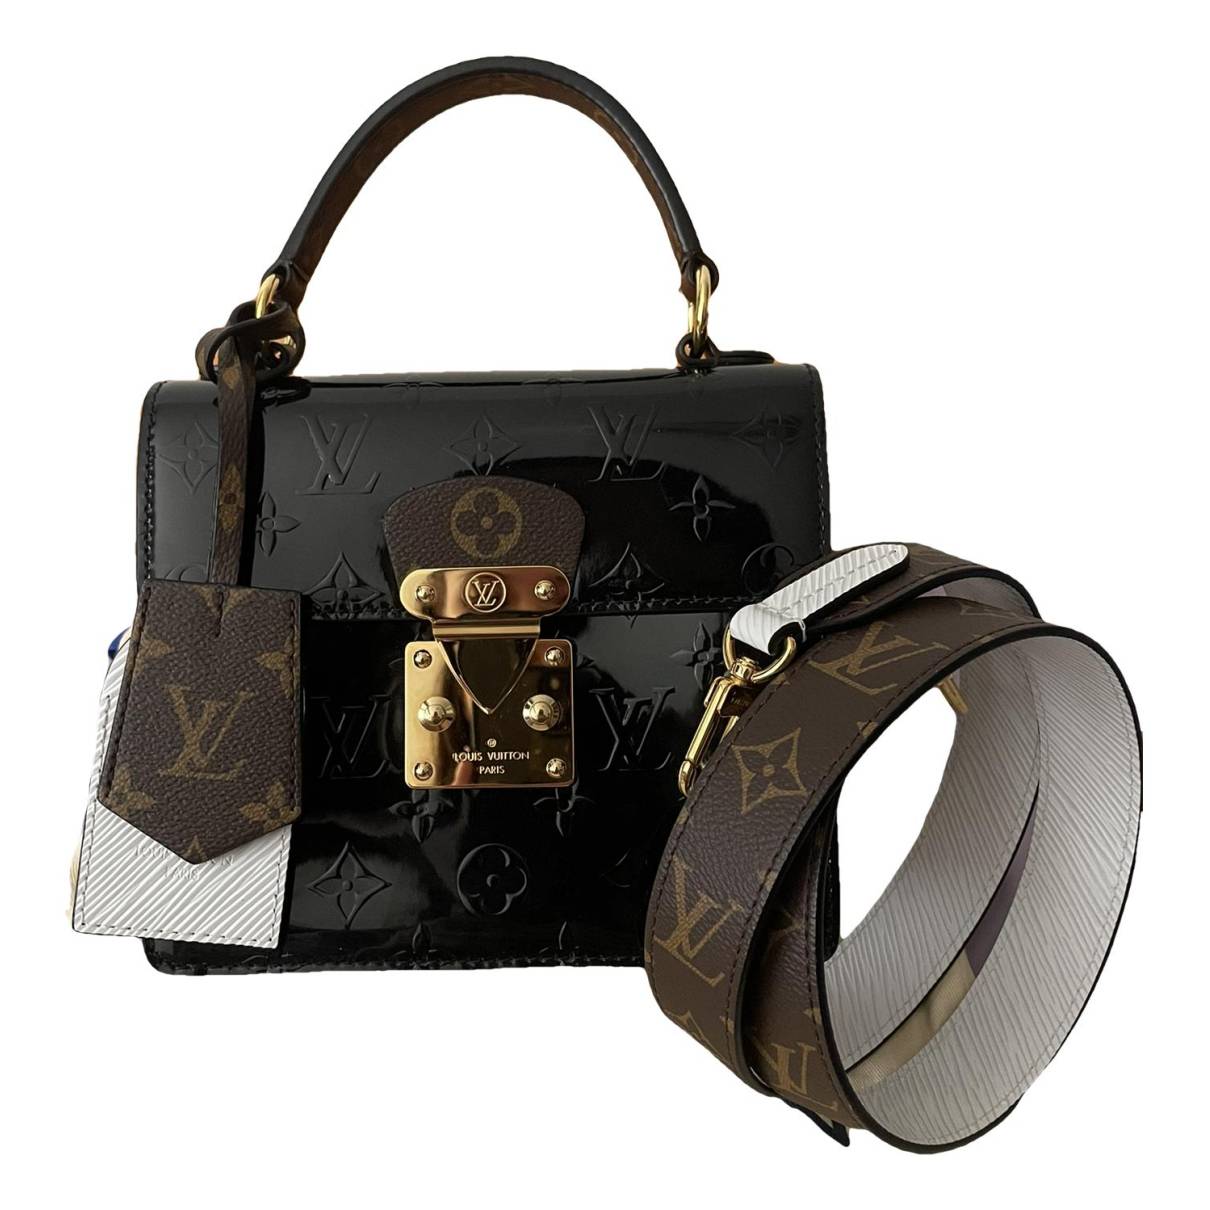 Spring street patent leather handbag Louis Vuitton Black in Patent leather  - 37183973